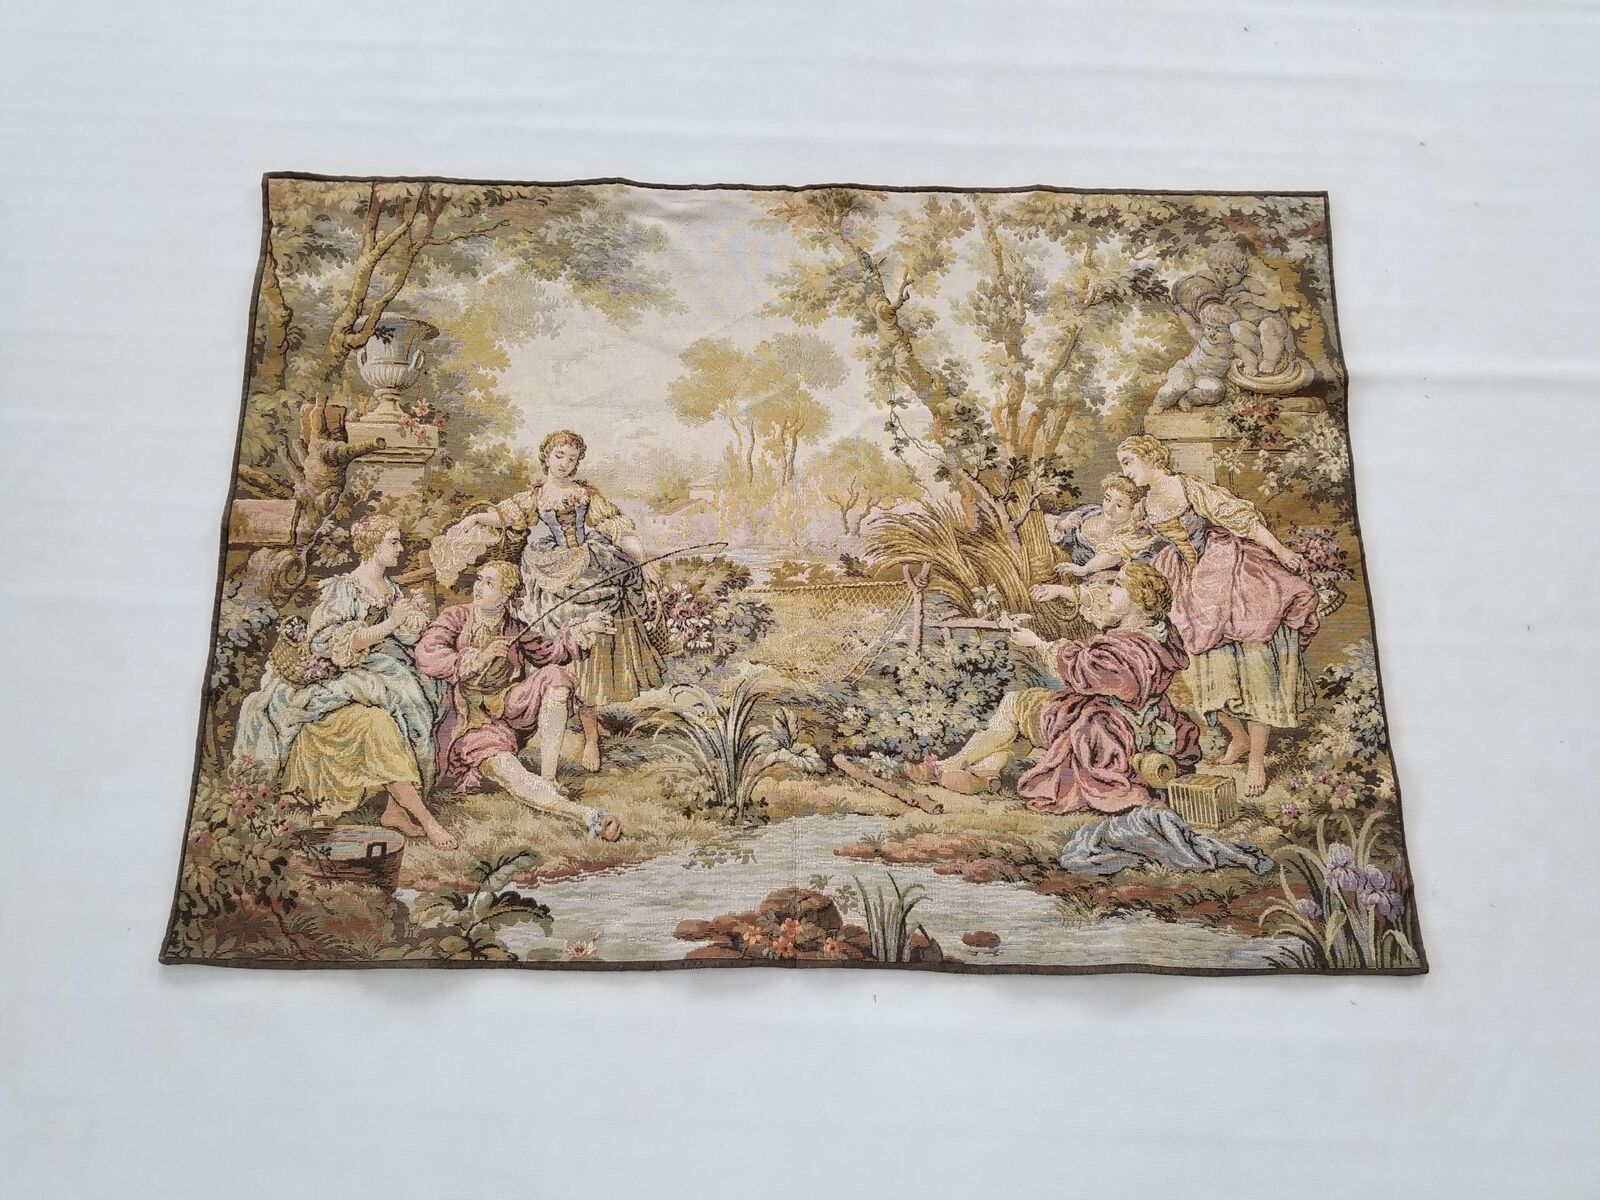 Vintage French Fishing Scene Wall Hanging Tapestry 103x96cm